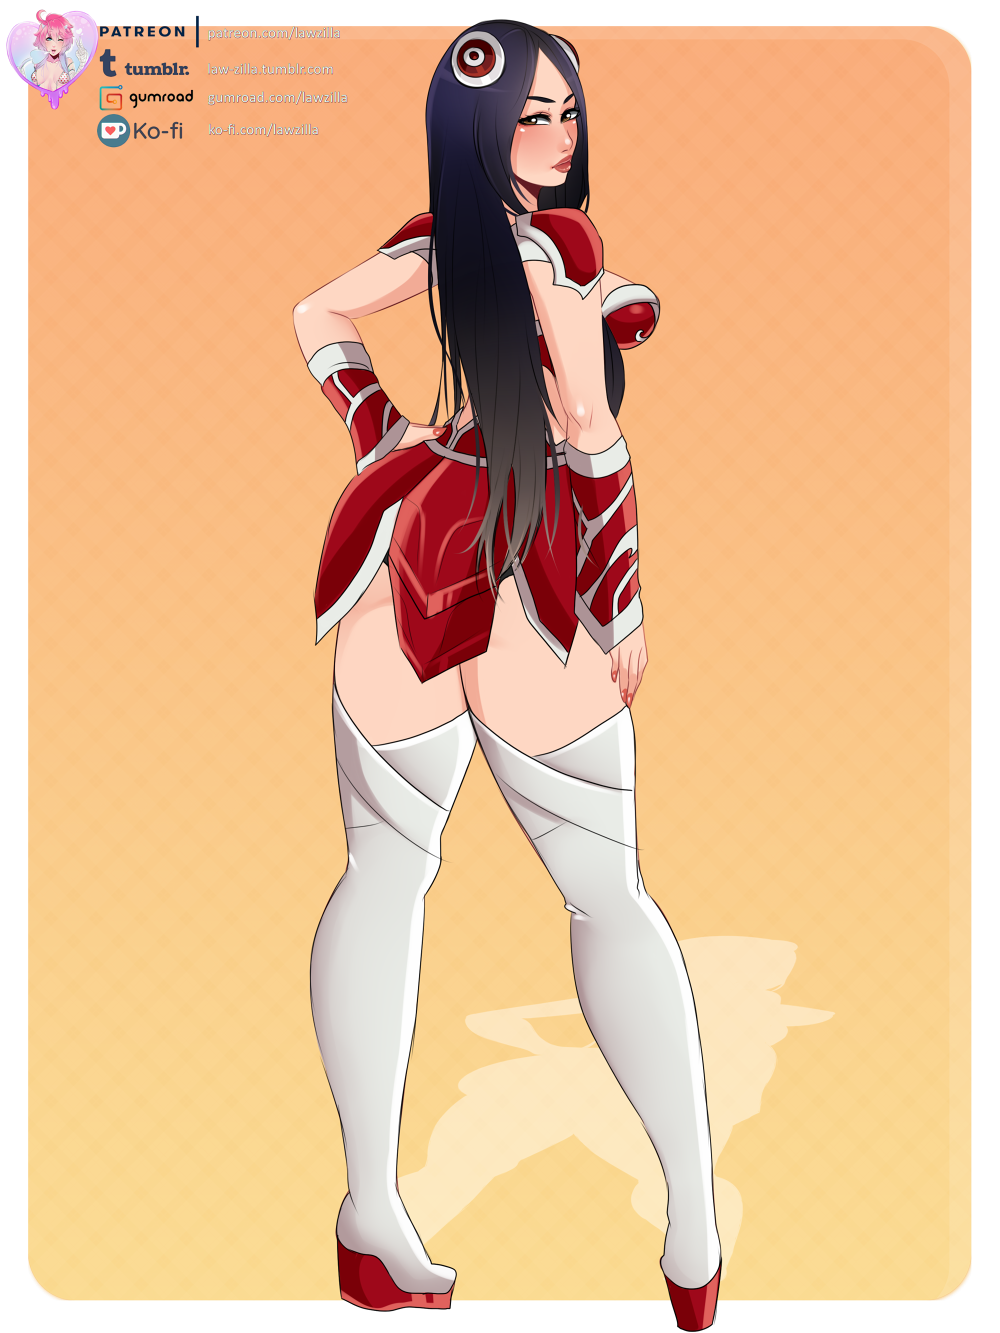 Finished patreon comm of Irelia from League of LegendsFarewell to our booty qween,